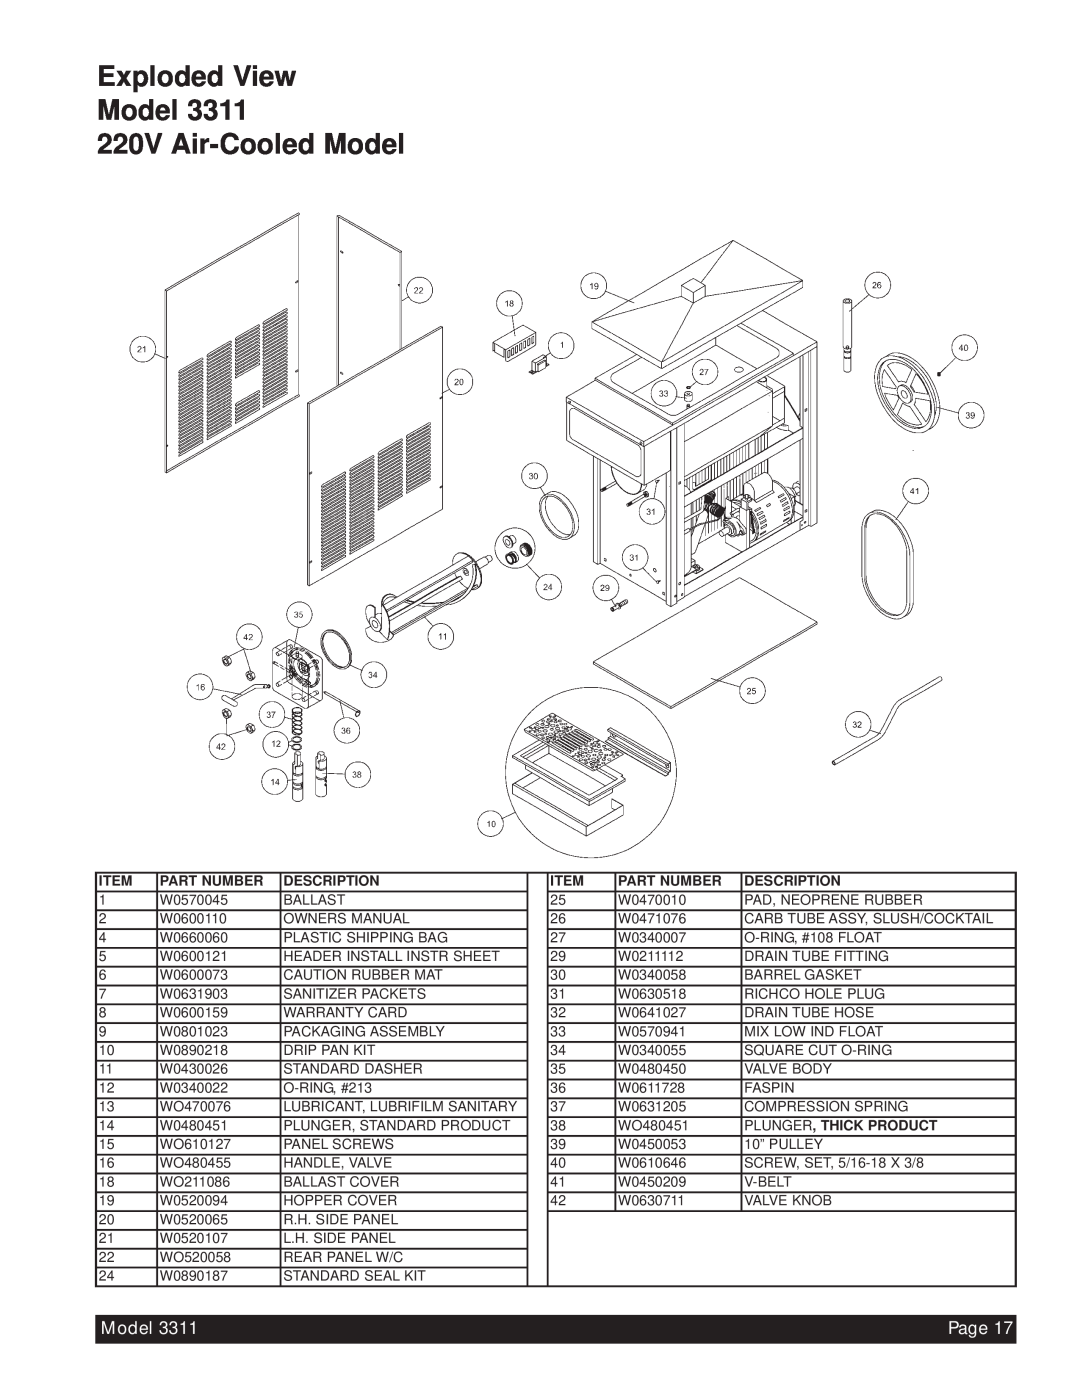 Beverage-Air 3311 Exploded View Model 220V Air-CooledModel, Page, Part Number, Description, Item, Plunger, Thick Product 